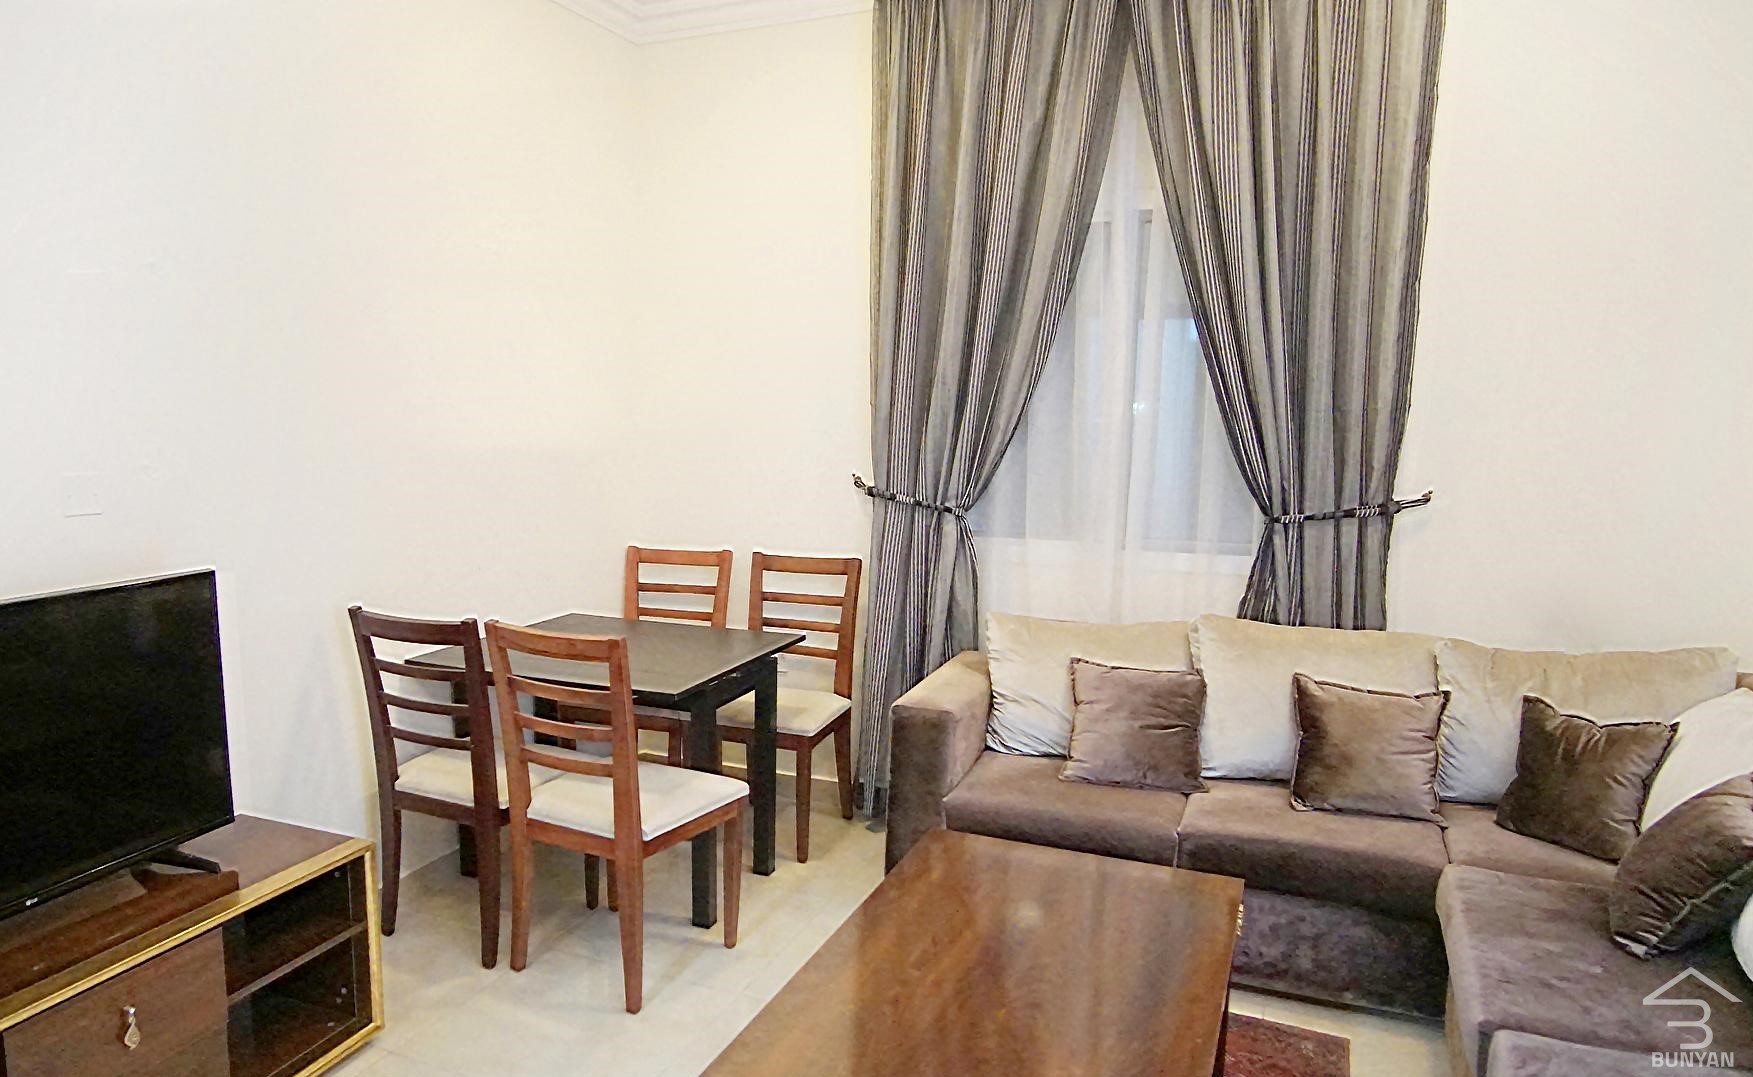 1 bedroom apartment fully furnished with/utilities (water, electricity, wifi)